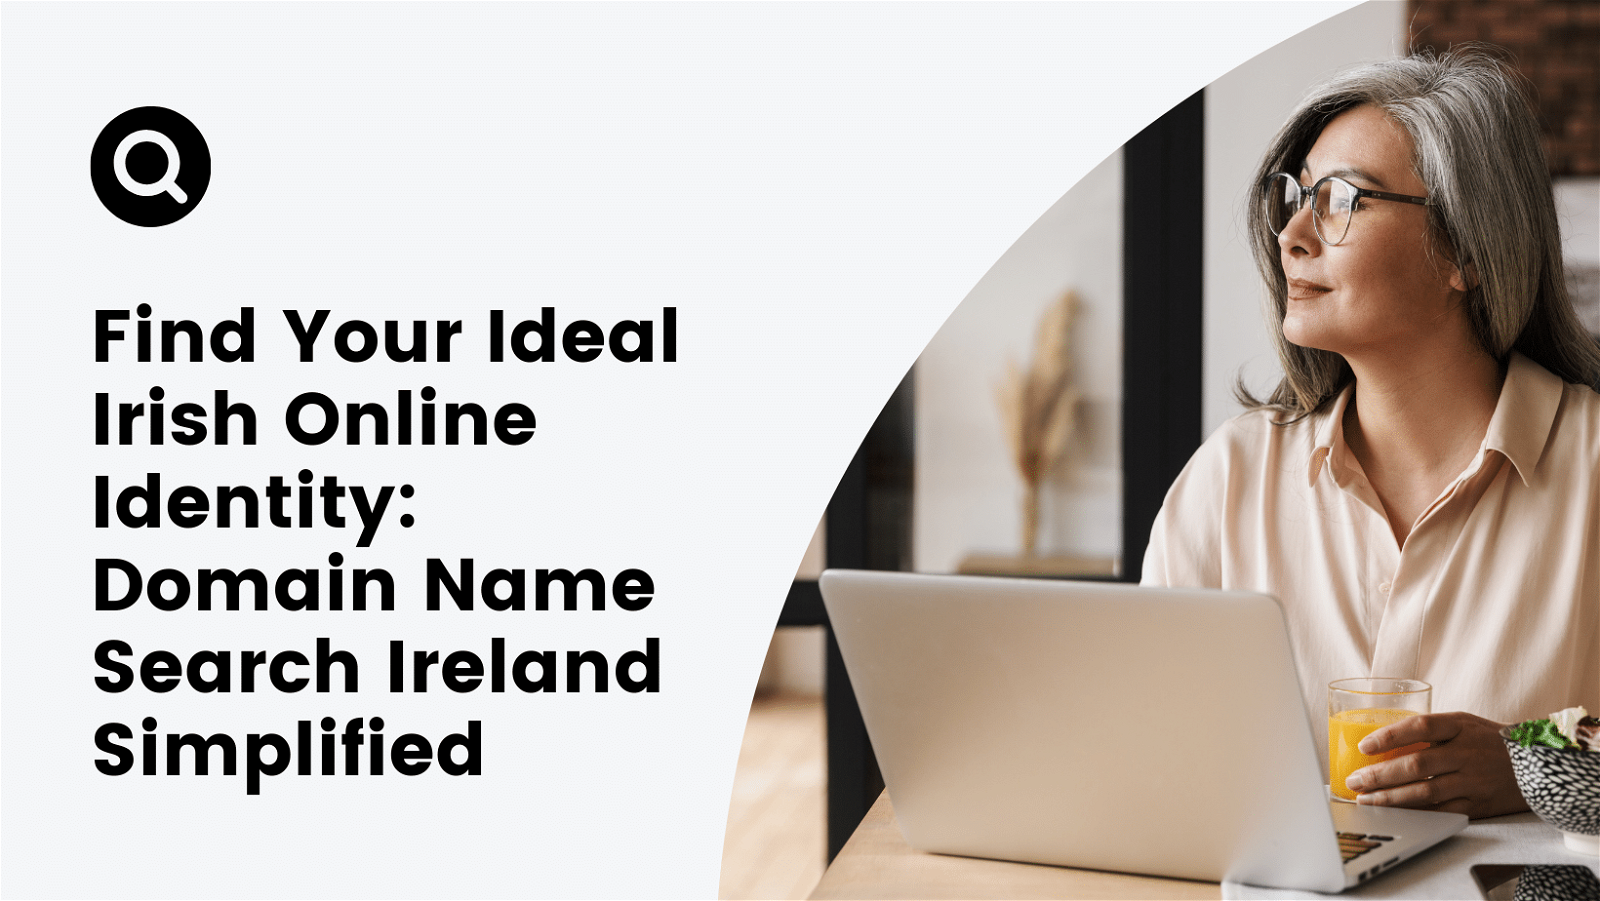 Find your ideal Irish domain name with our simplified online identity search in Ireland.